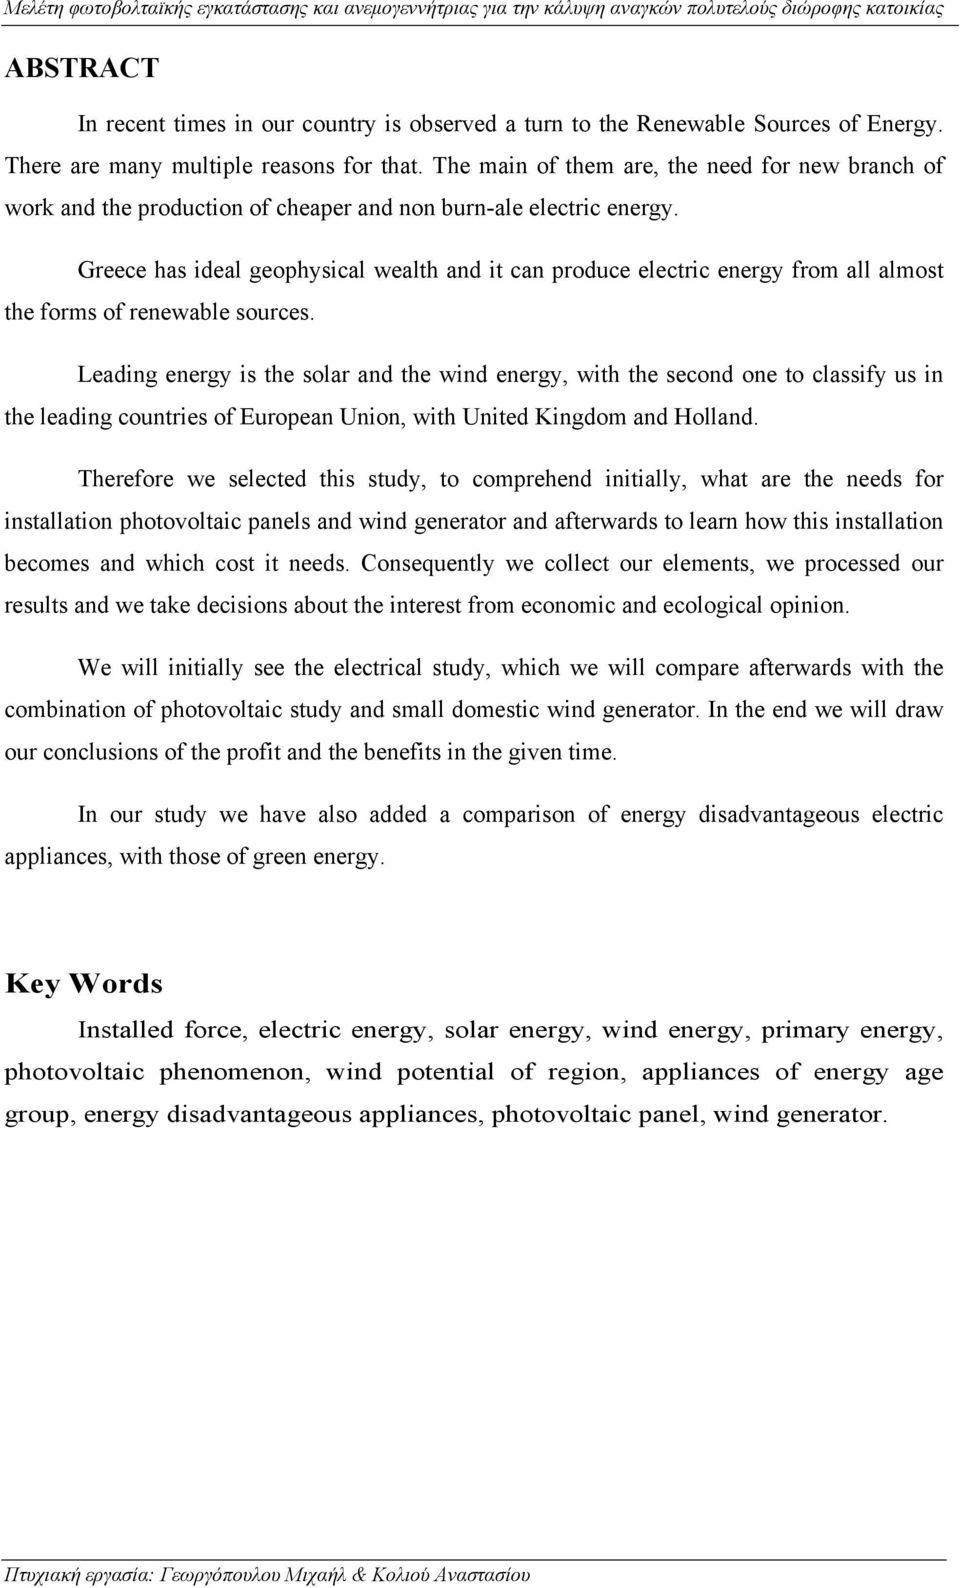 Greece has ideal geophysical wealth and it can produce electric energy from all almost the forms of renewable sources.